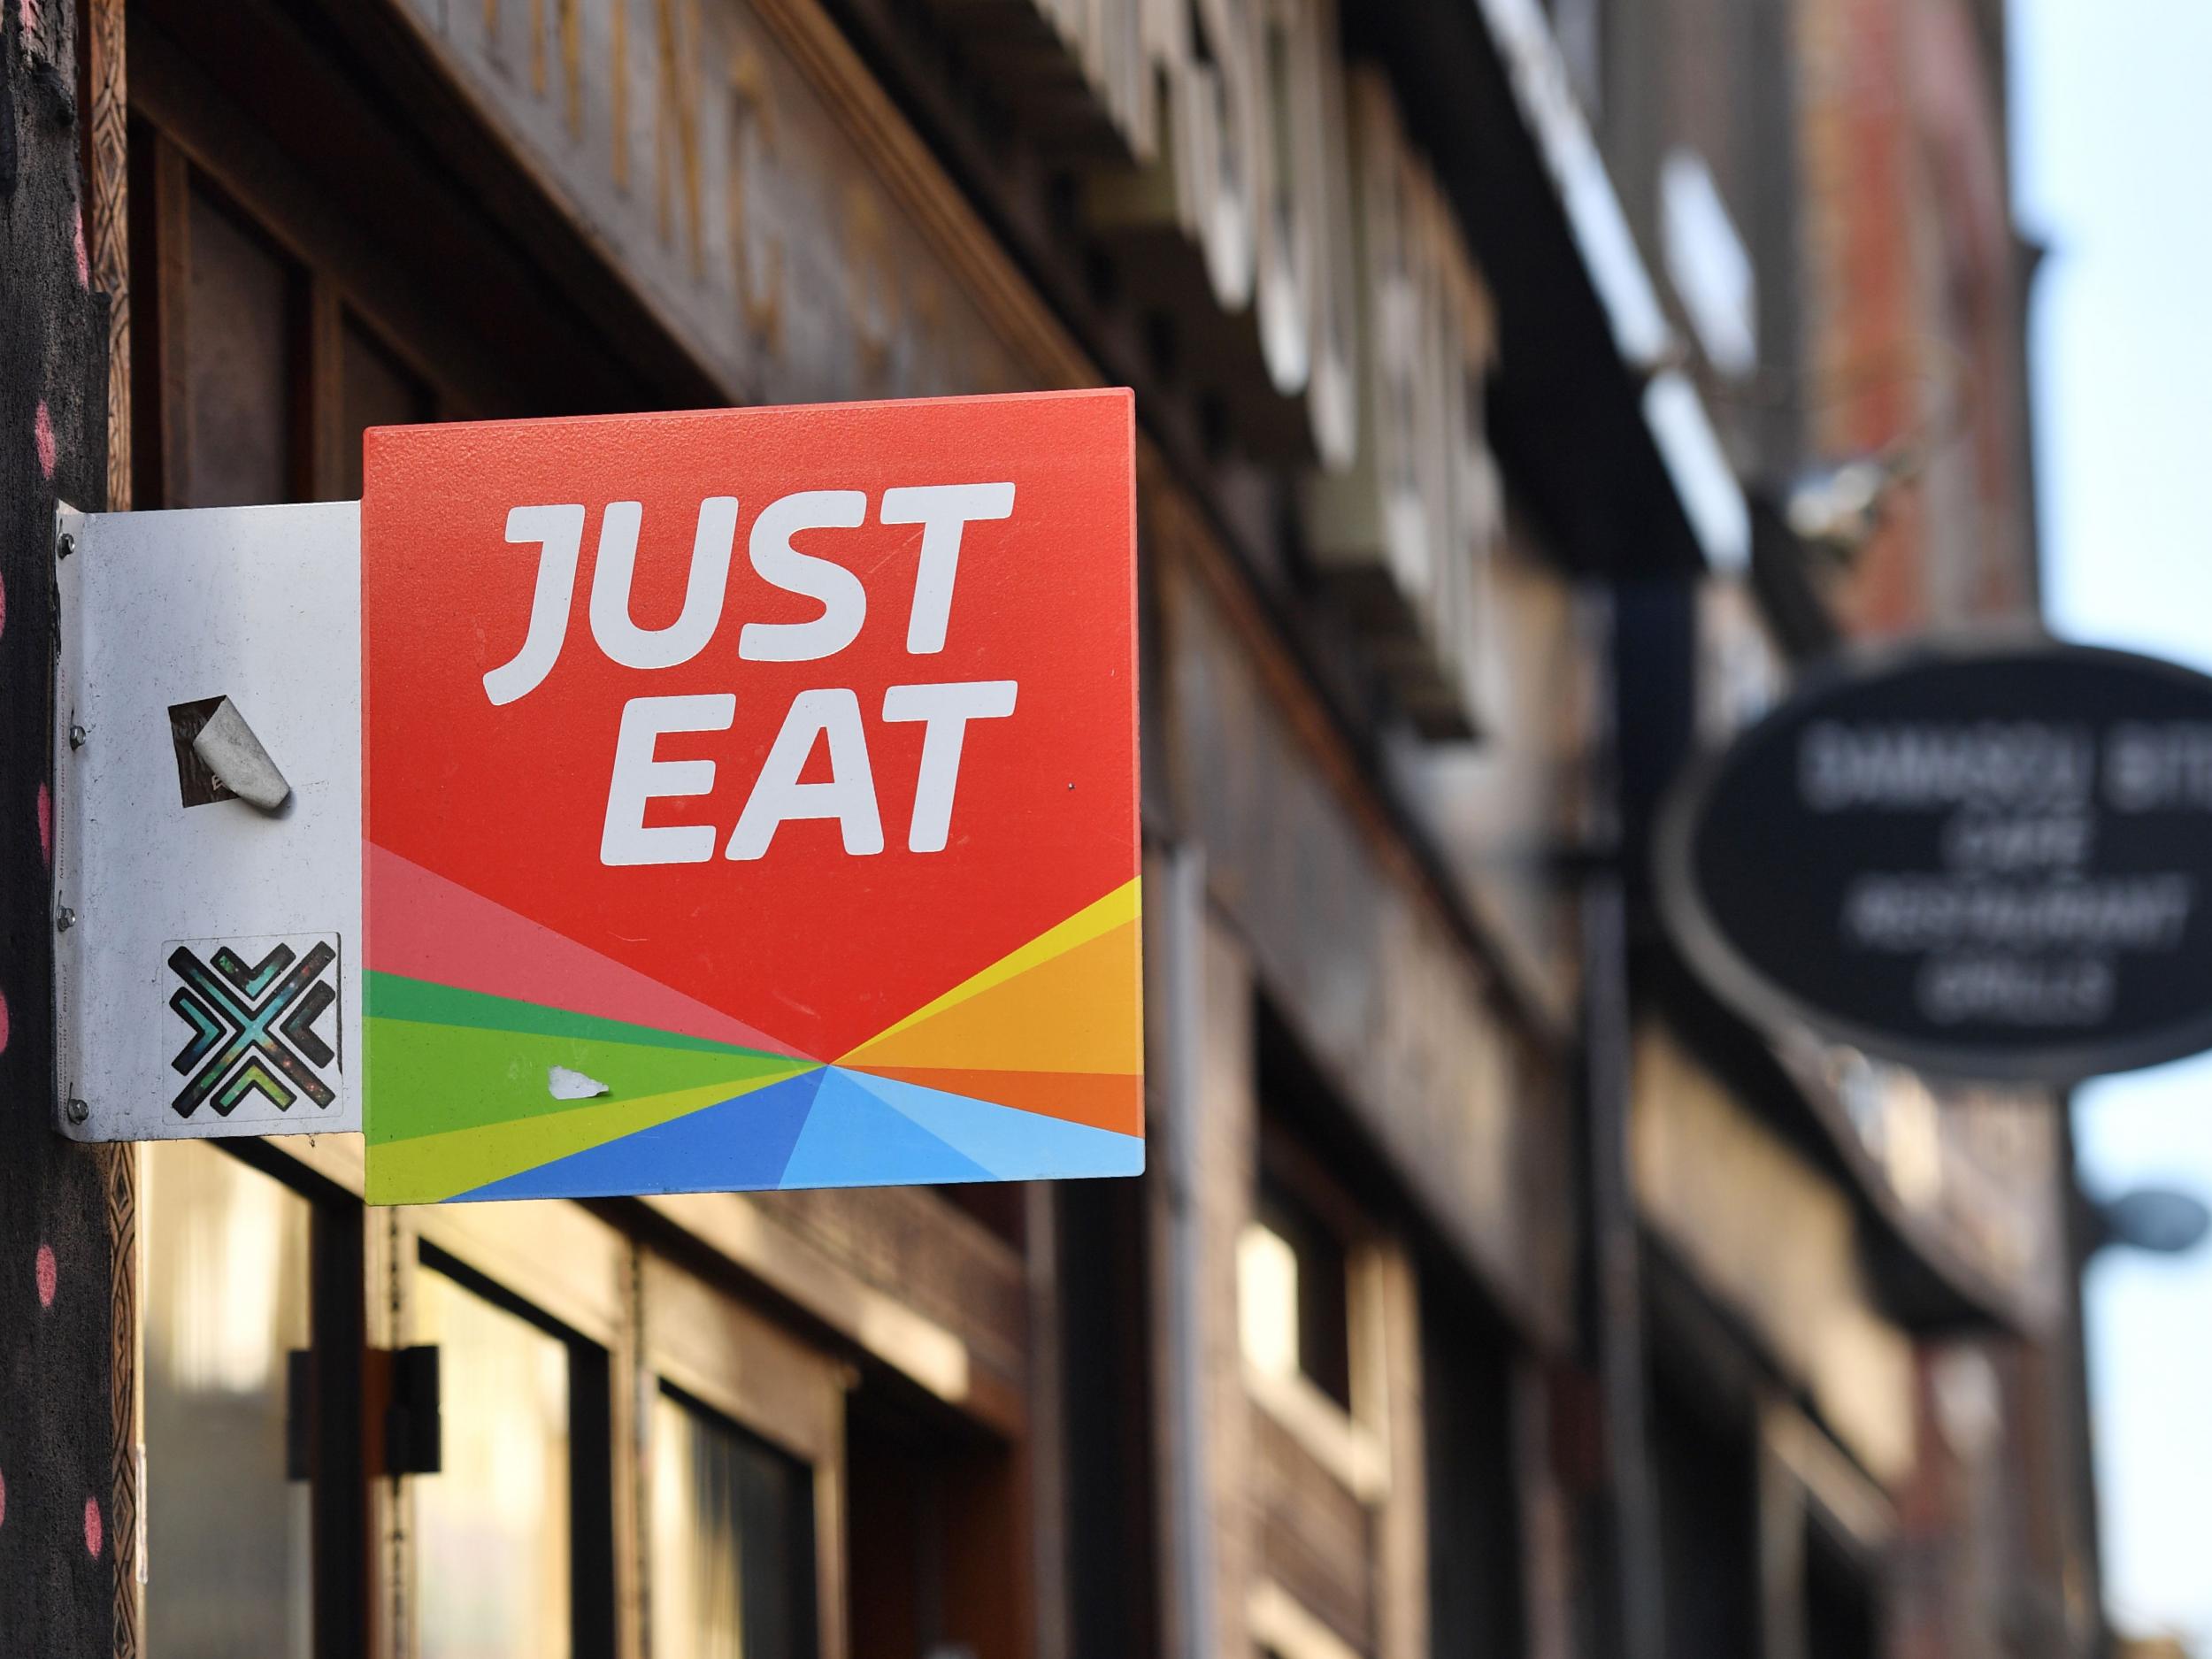 Takeaway company Just Eat has delivered a sharp rise in sales